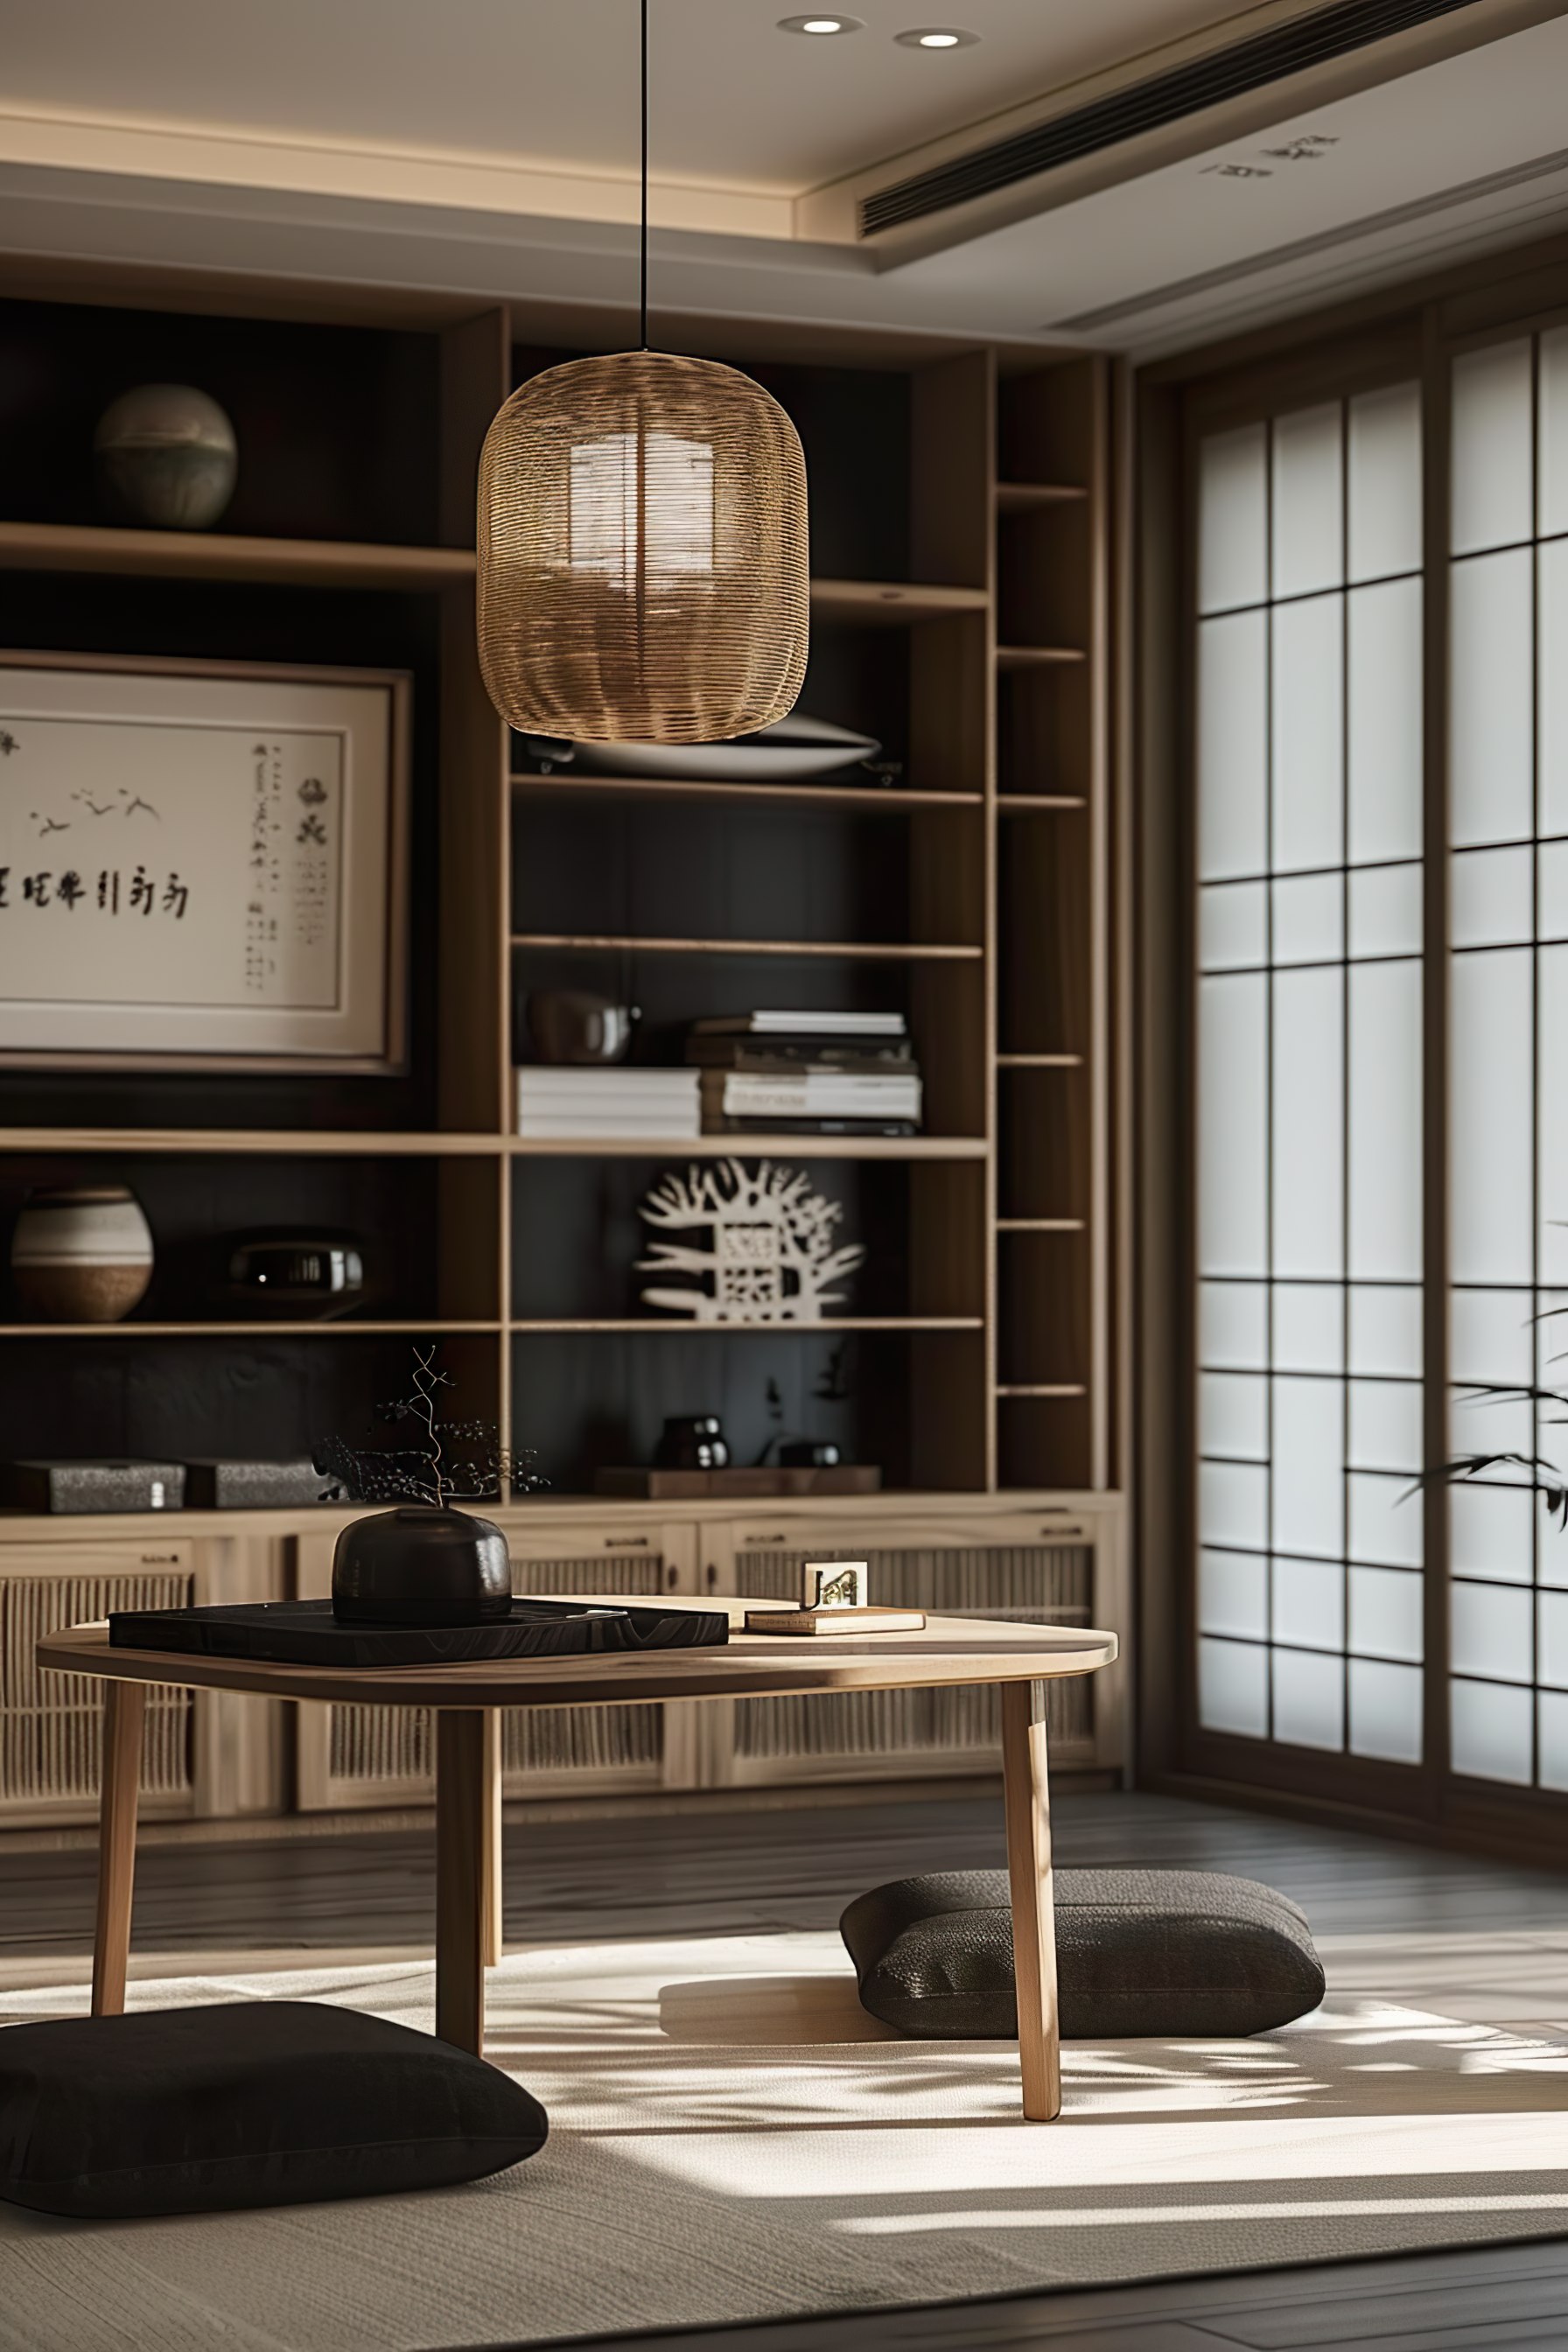 Minimalistic Japanese-style room with a woven pendant light, tatami floor, low table, cushions, and traditional decor elements.